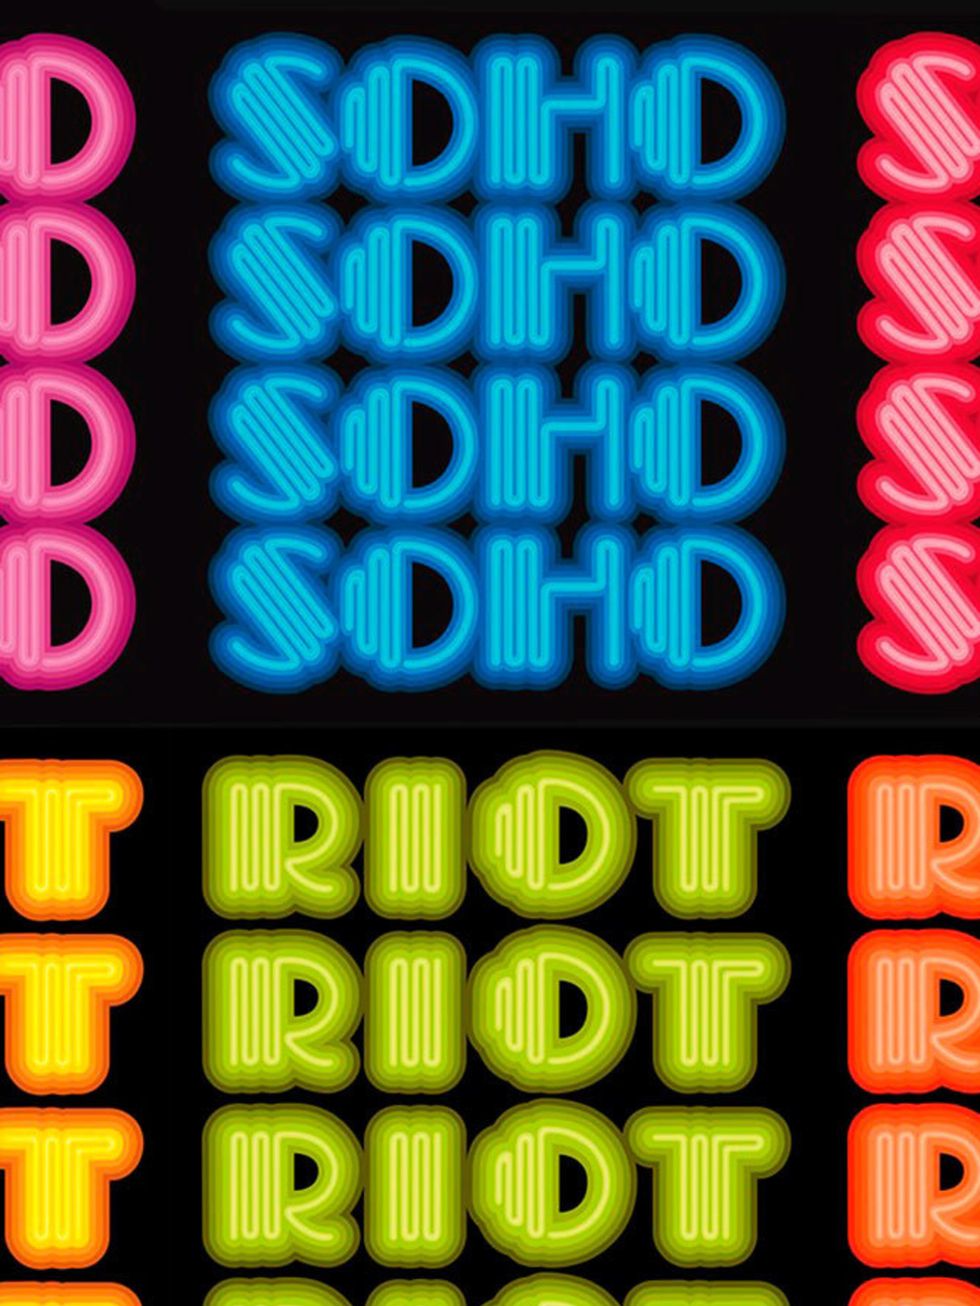 <p>ART: Ben Eine: Soho Riot</p>

<p>We&rsquo;ve made no secret that our love for Lights of Soho, London&rsquo;s leading light-art gallery, runs deep. But now, somehow, they&rsquo;ve managed to make us love it even more with this, what might just be its co